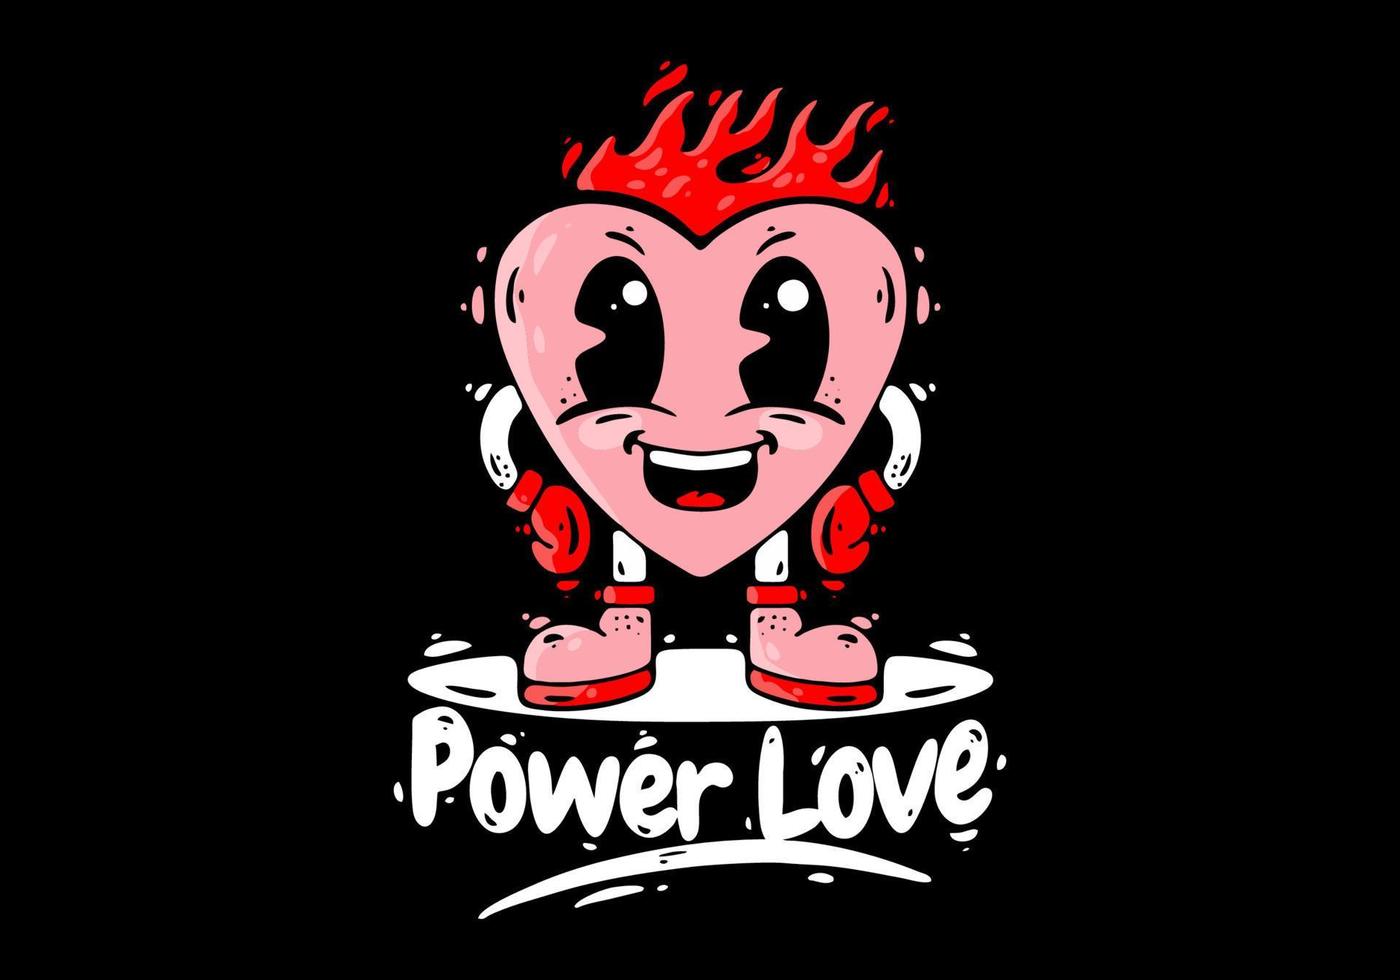 Illustration character design of pink heart with red fire flame vector